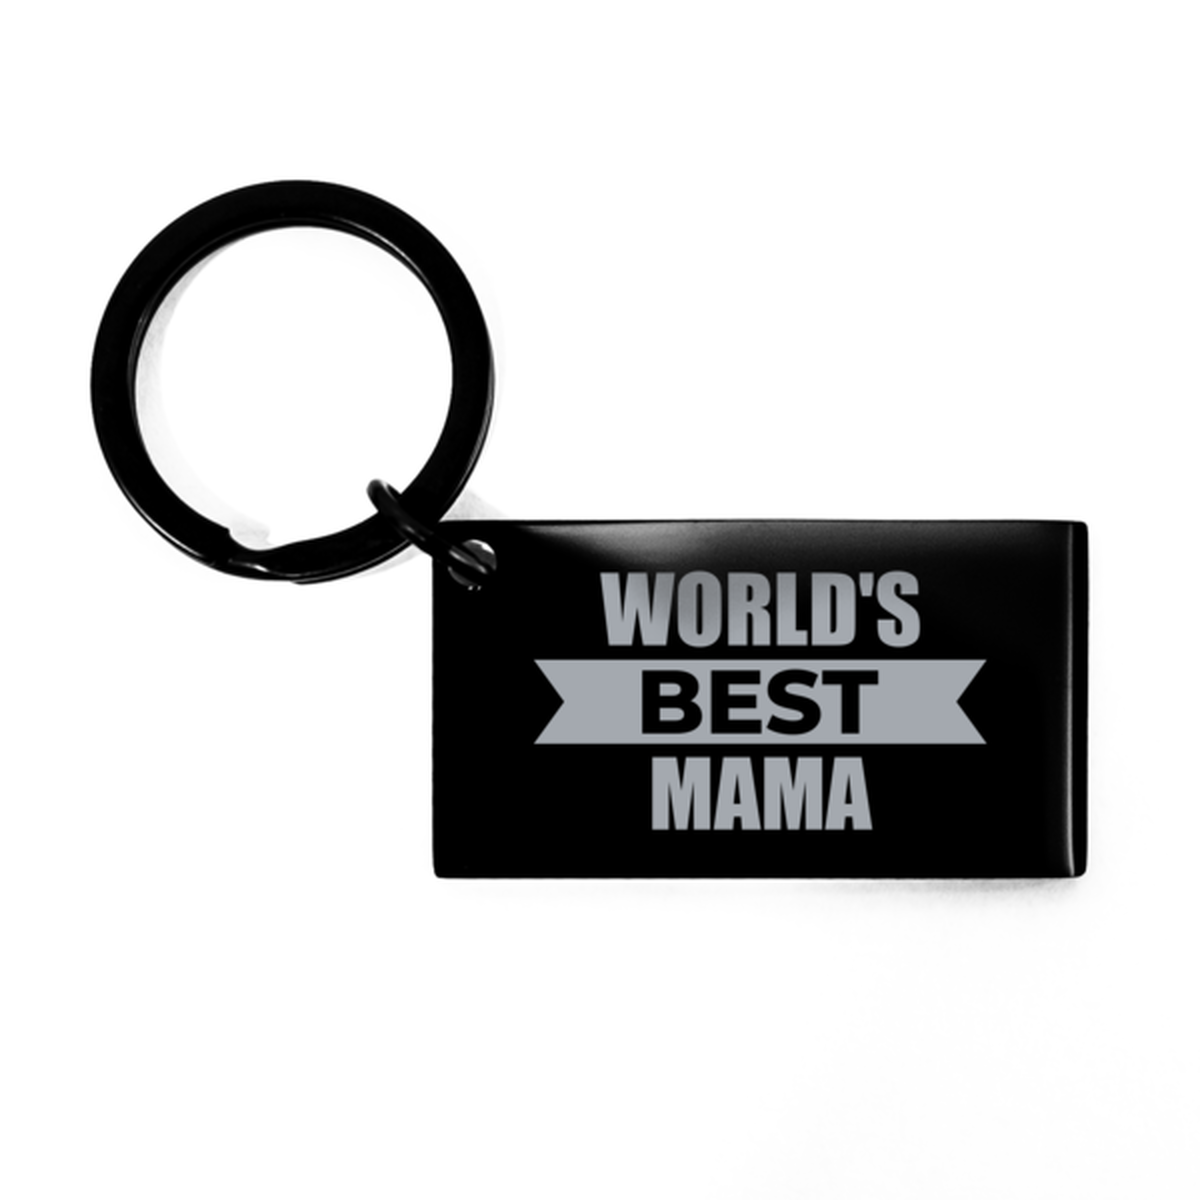 Worlds Best Mama Gifts, Funny Black Engraved Keychain For Mama, Birthday Presents For Women